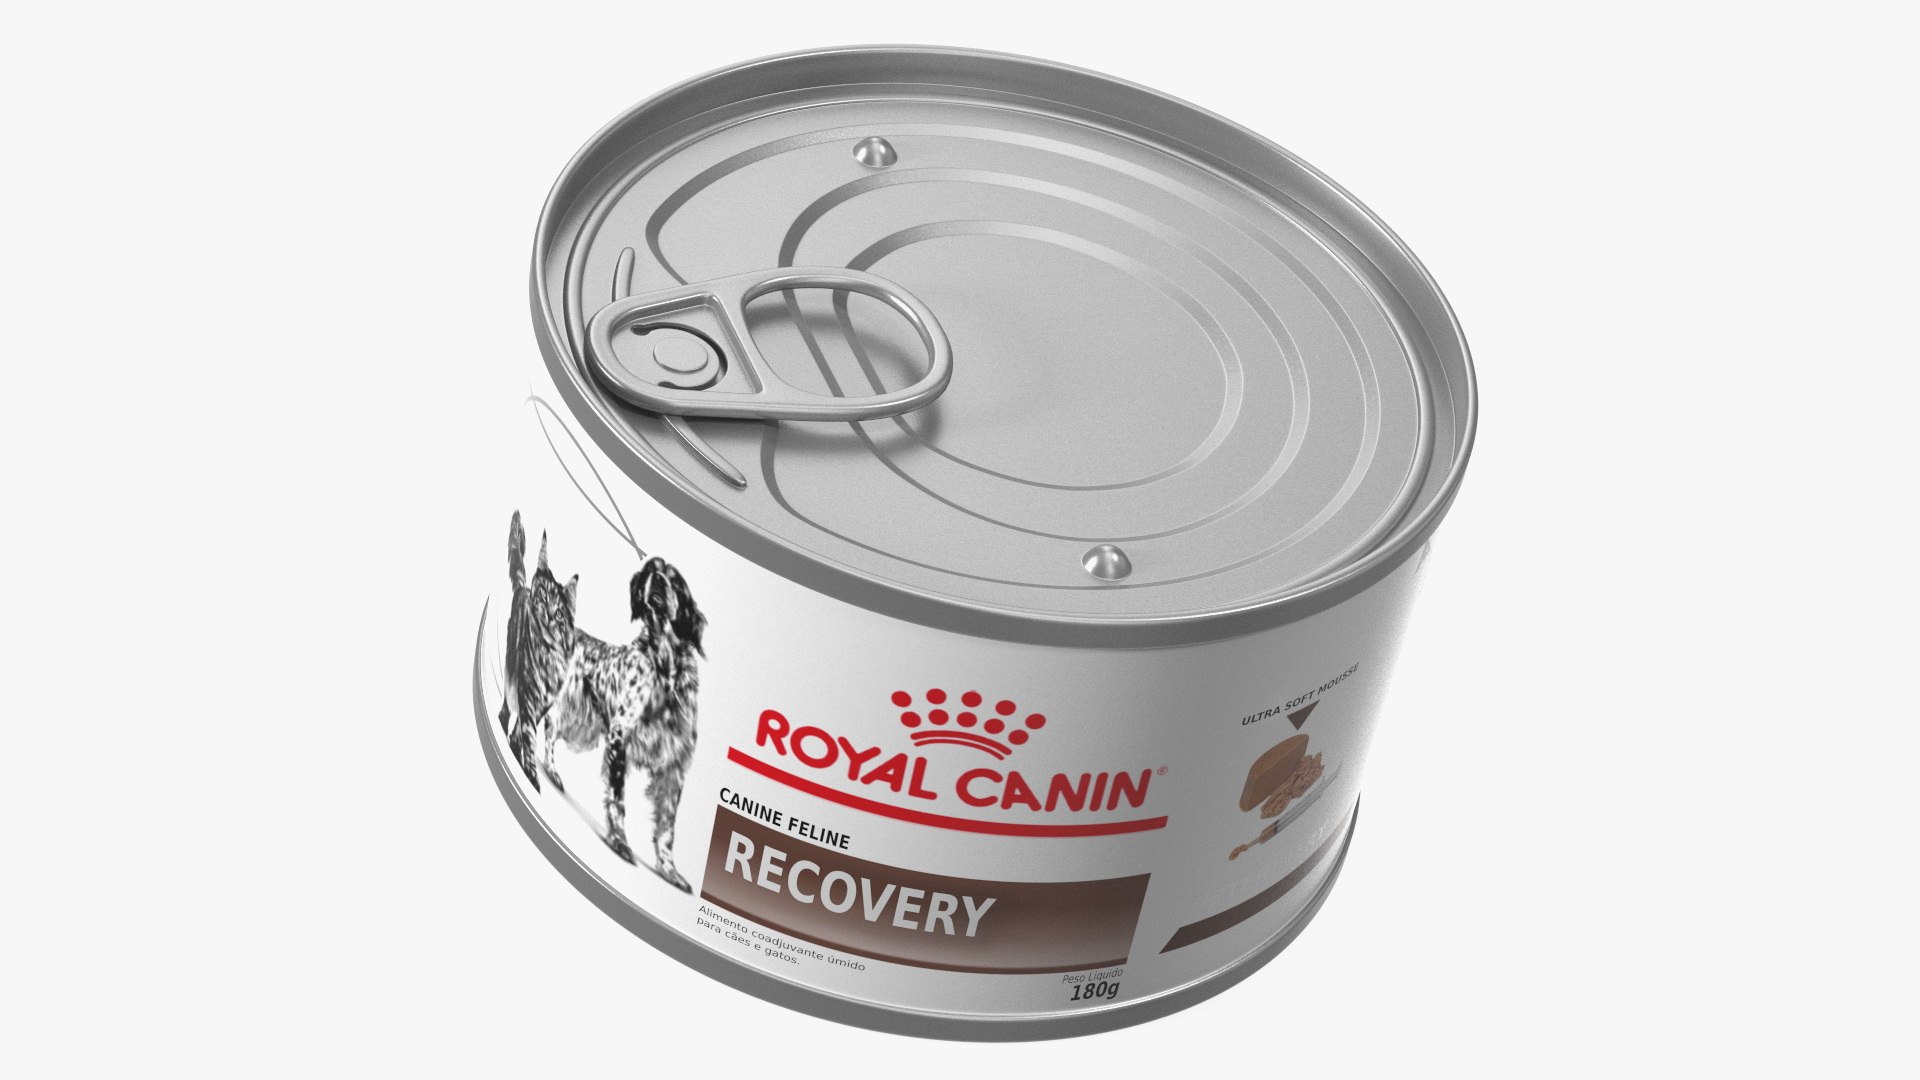 Royal Canin Recovery Can Wet Food for Cats and Dogs